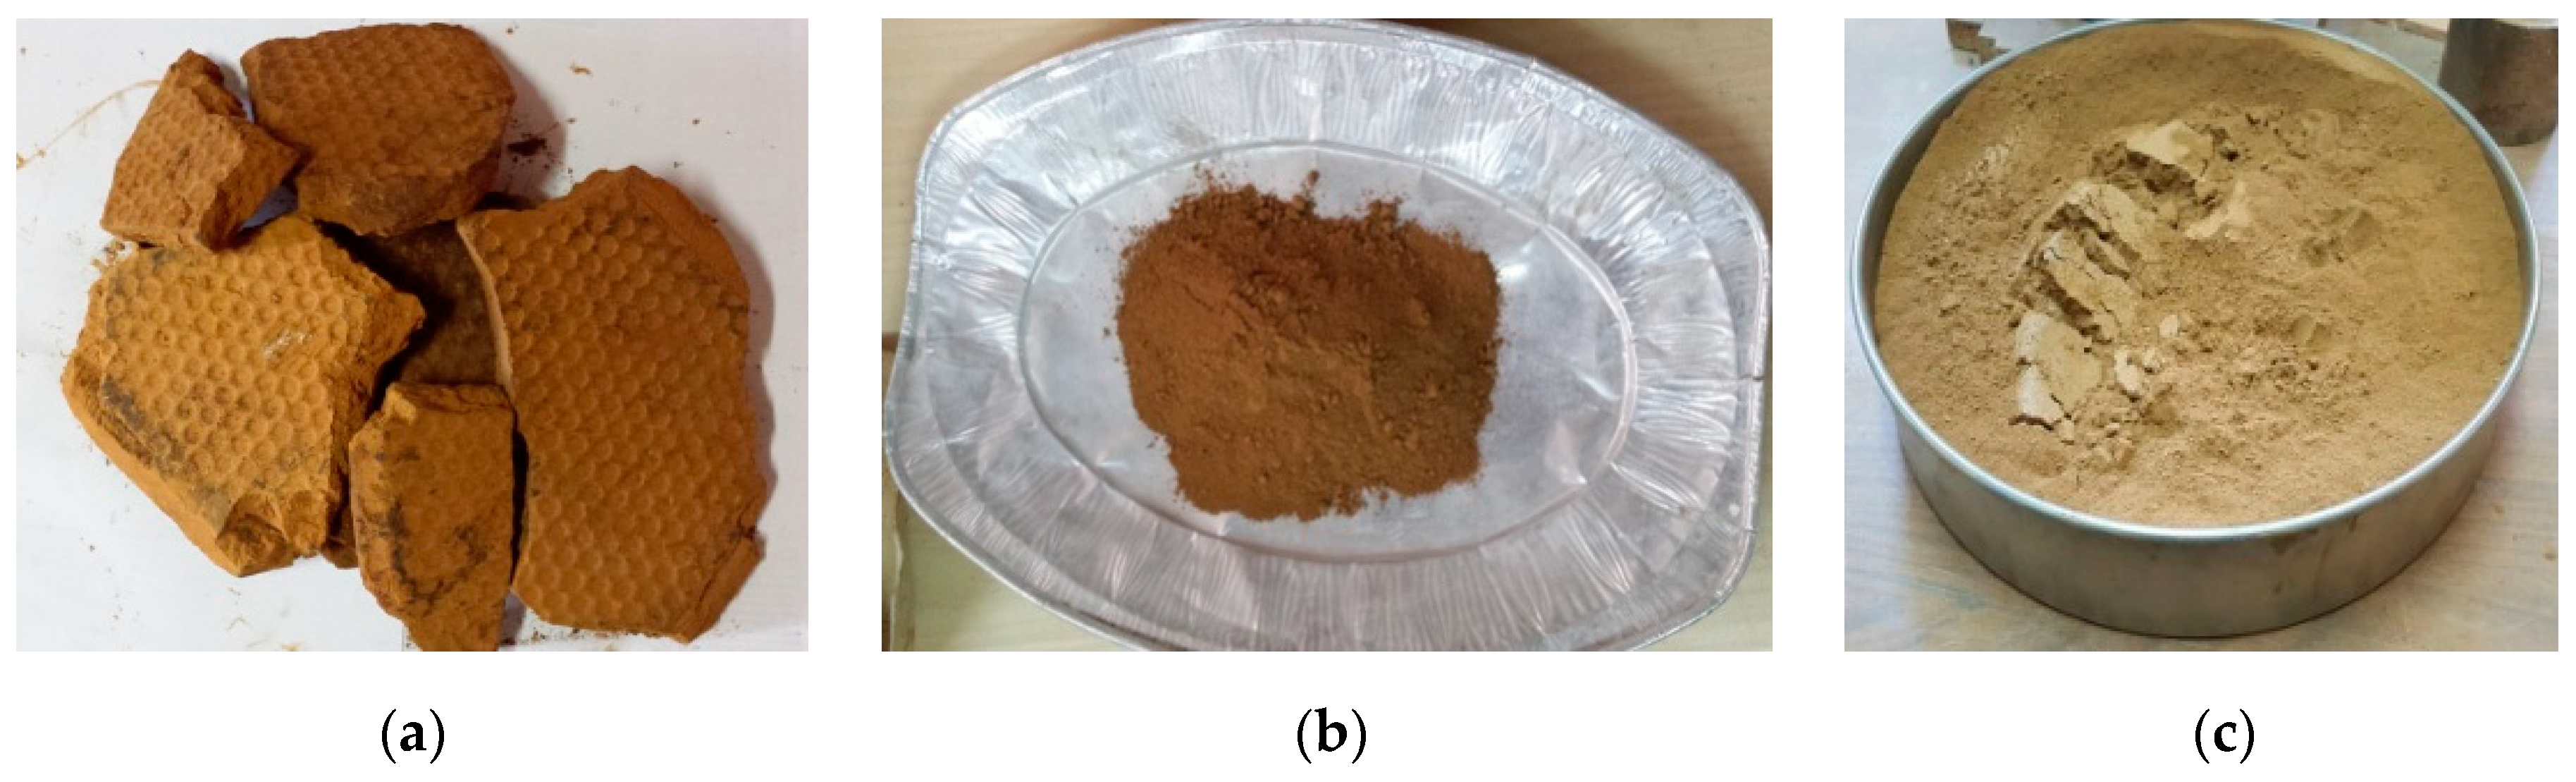 Metals | Free Full-Text | Study Regarding the Micro Filler Effect of Sludge  Resulting from Steel Pickling | HTML